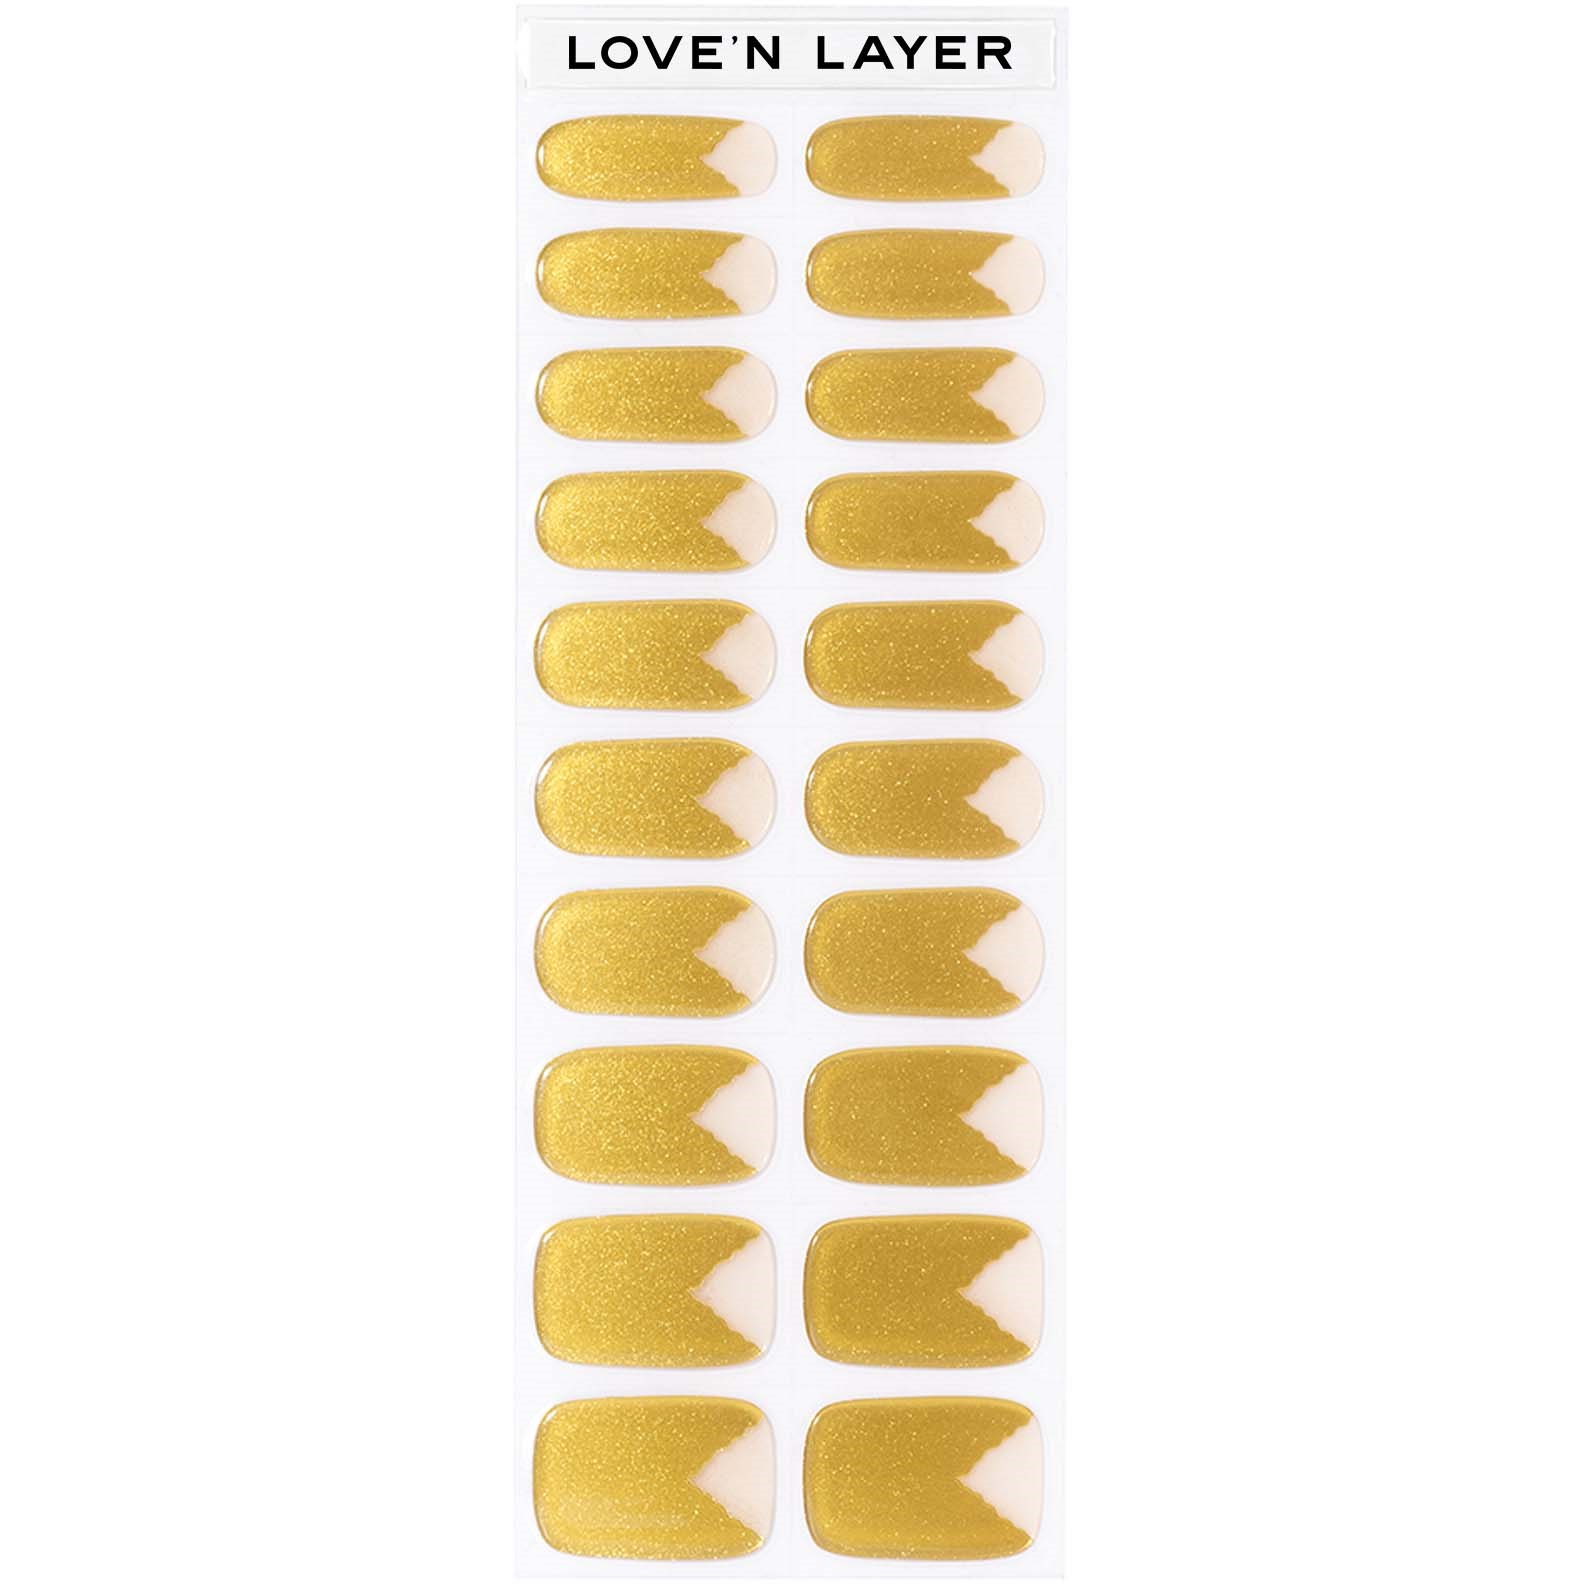 Loven Layer Love Note Minnies Swag Gold